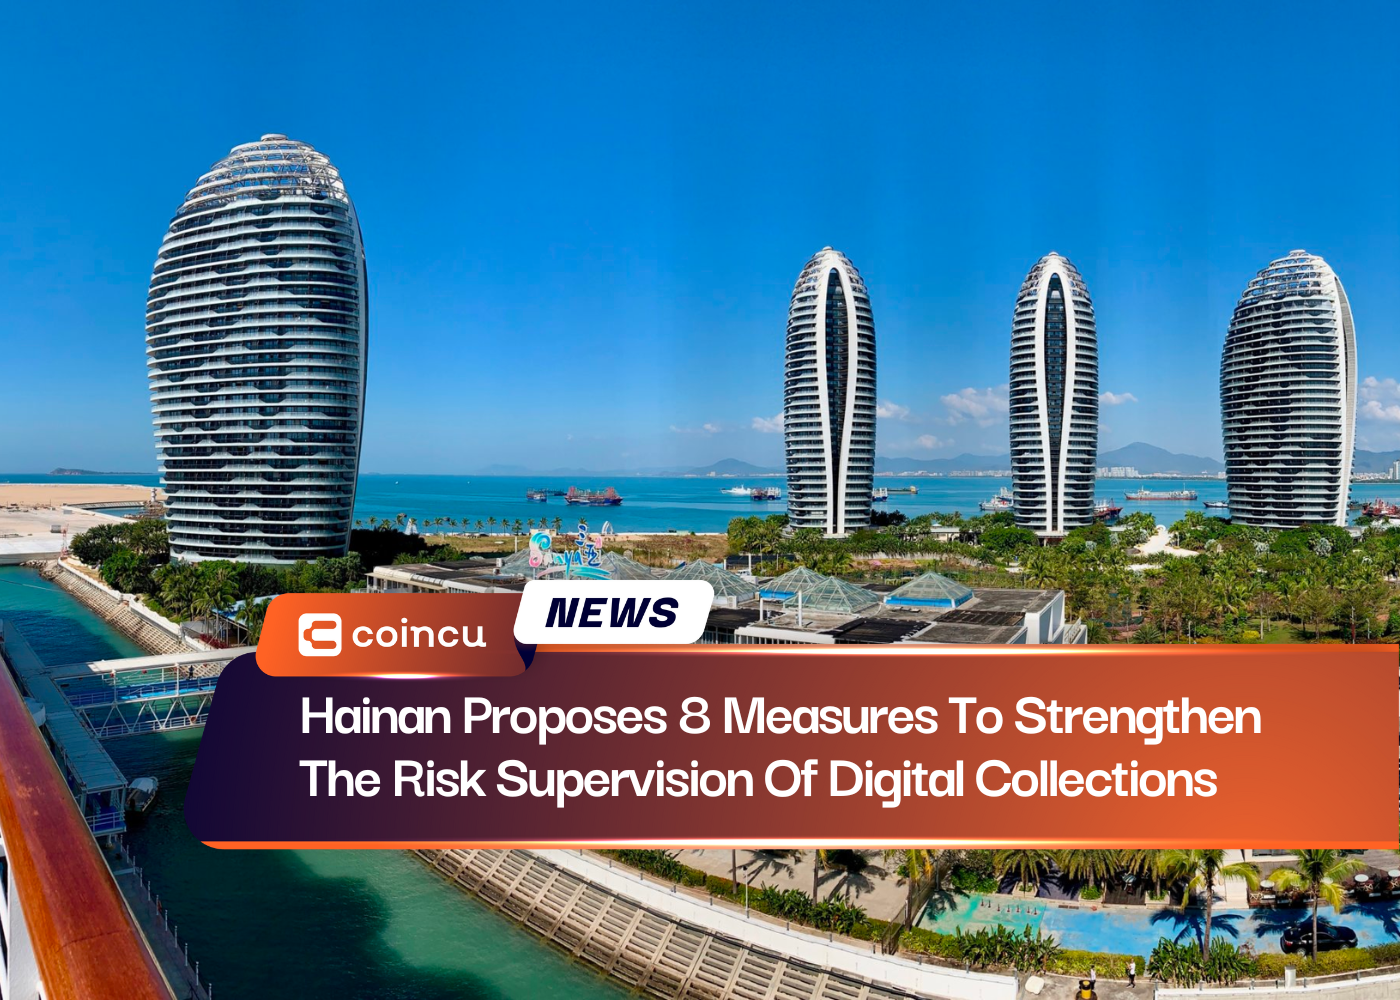 Hainan Proposes 8 Measures To Strengthen The Risk Supervision Of Digital Collections